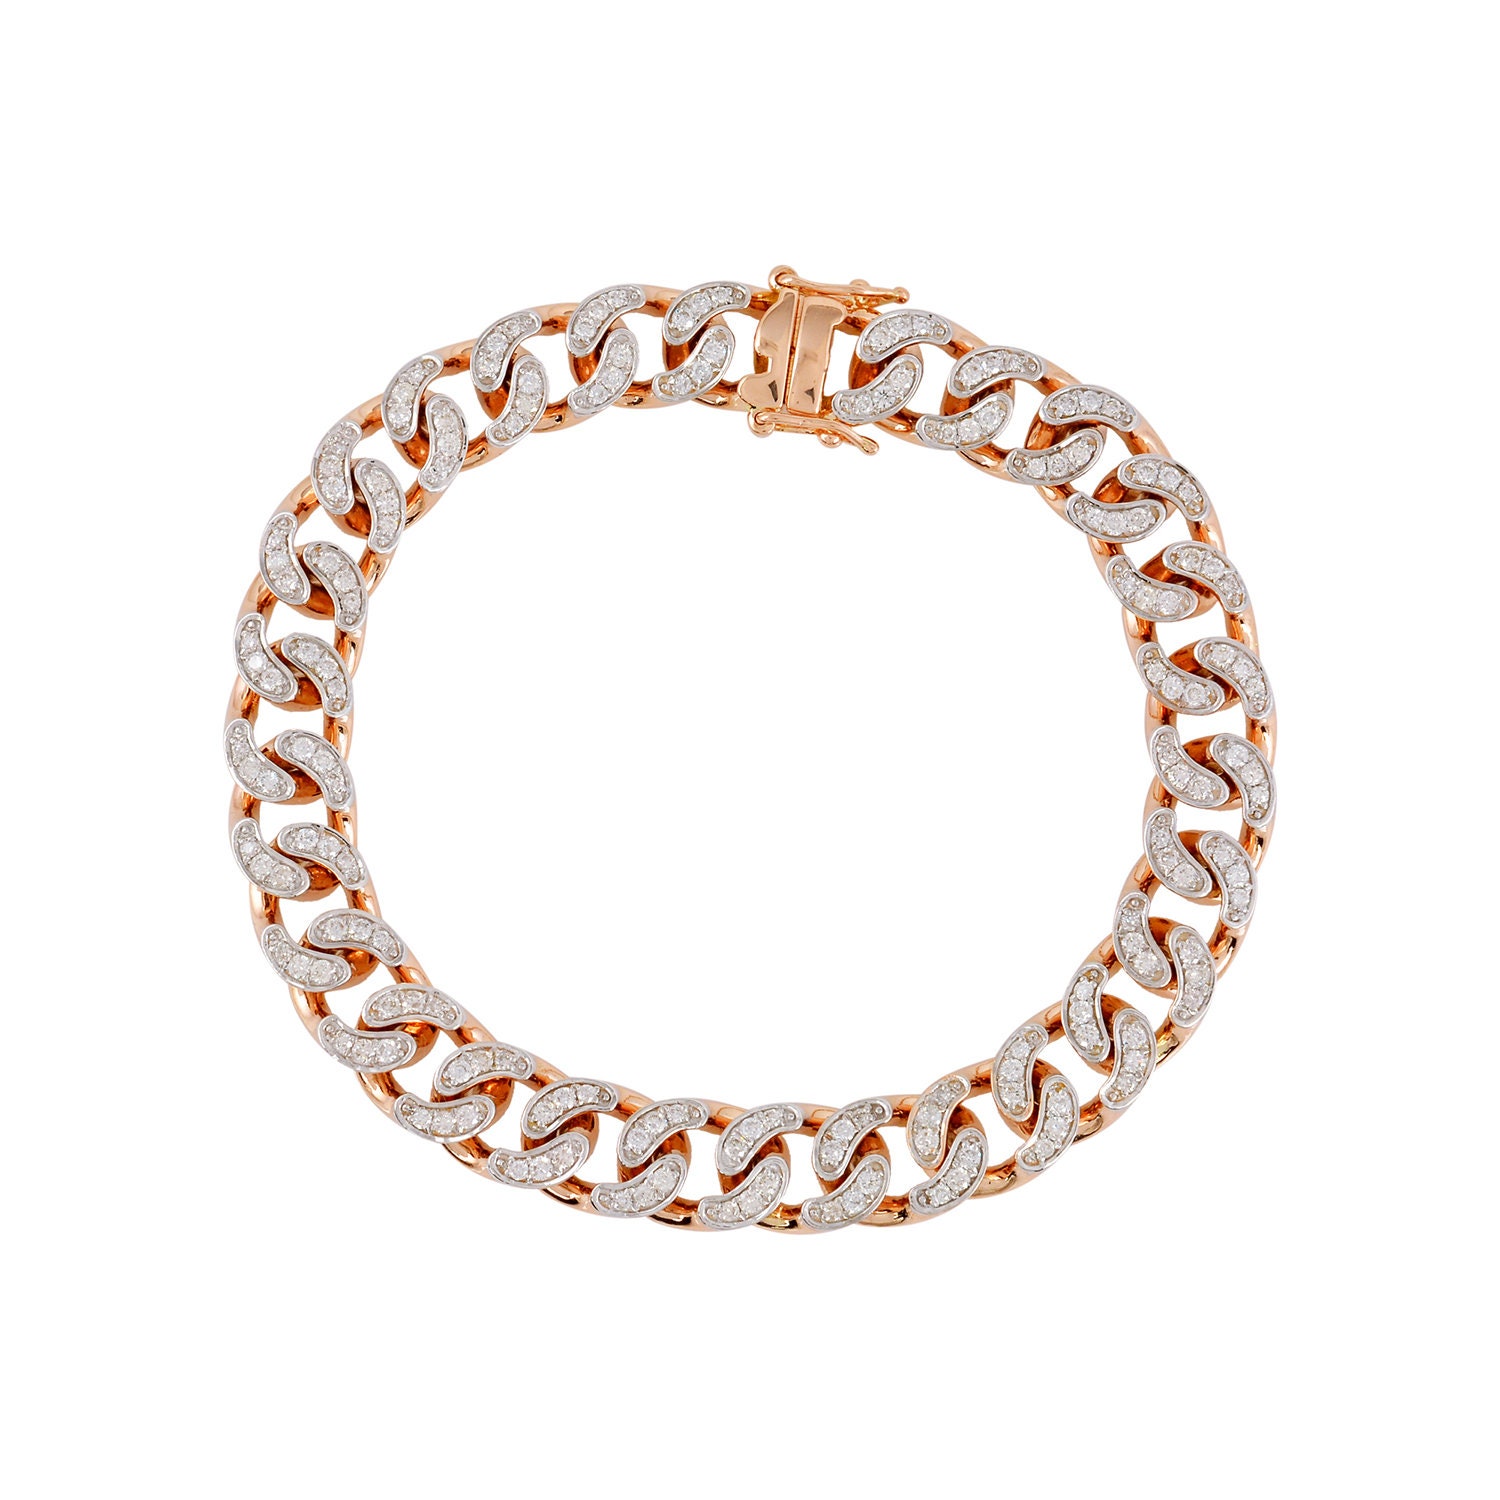 On Sale 2.2 Ct Si Clarity Hi Color Pave Diamond Link Chain Bracelet 14K Solid Rose Gold Fine Jewelry